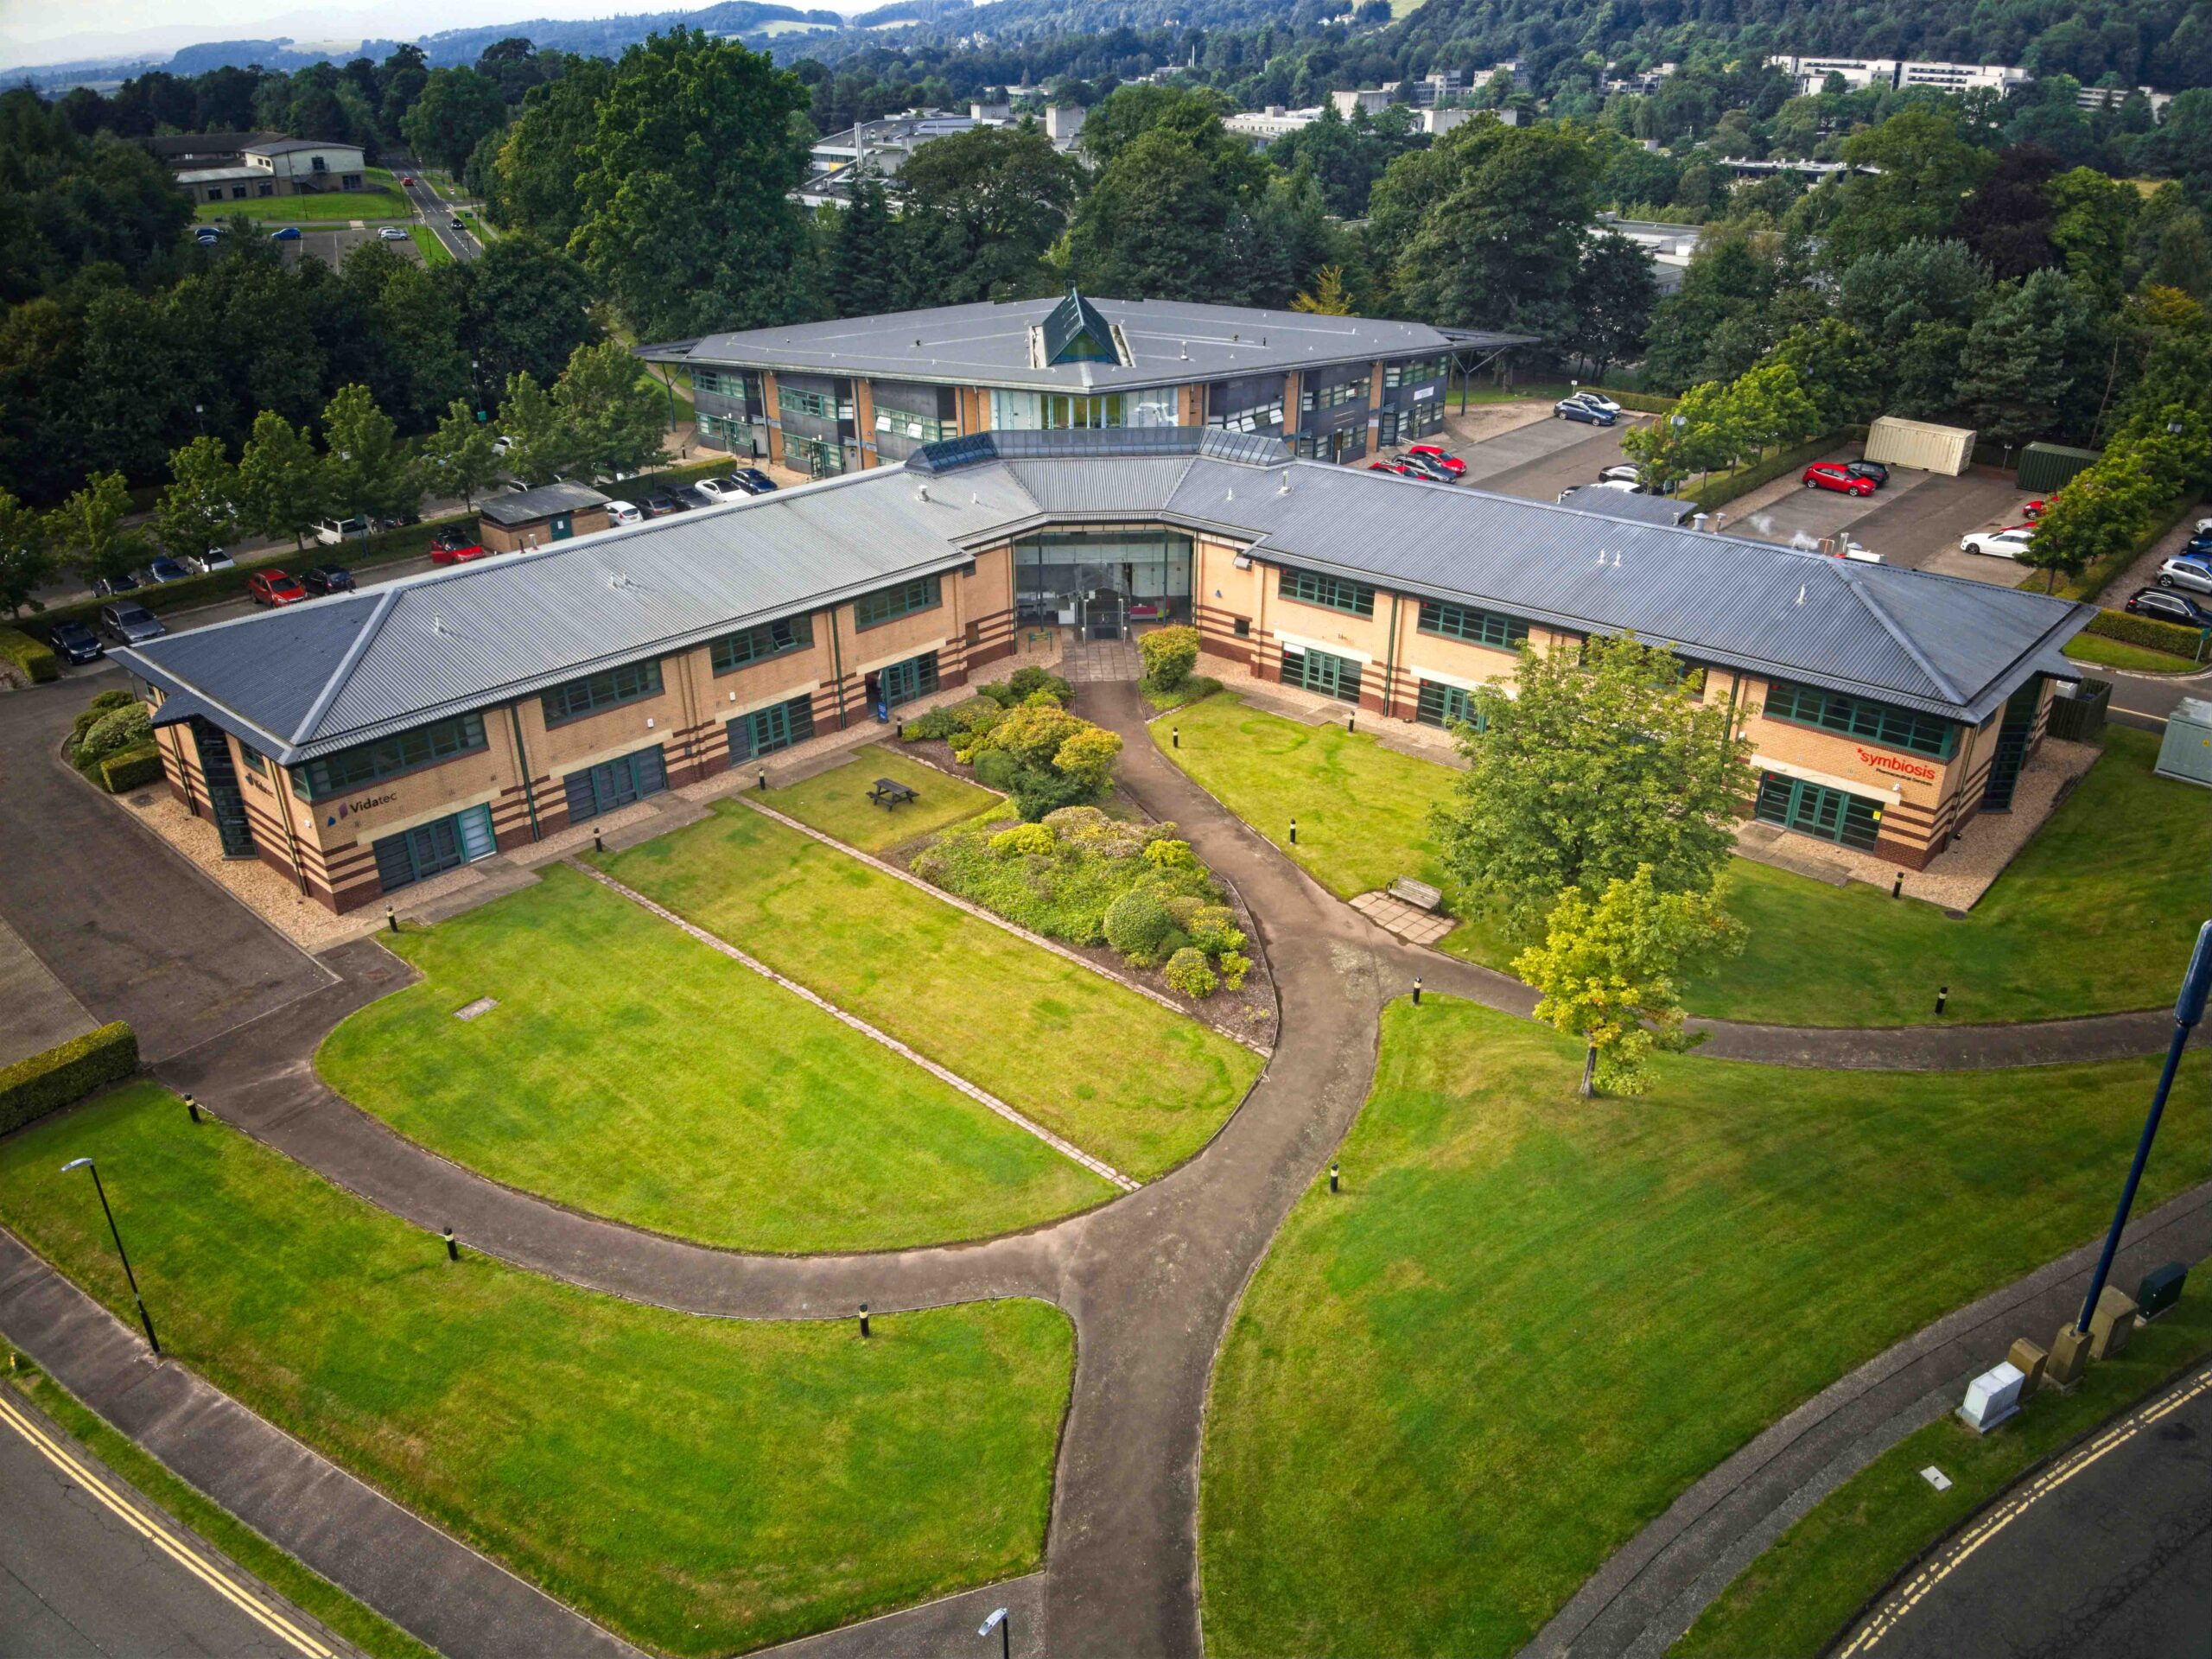 View from above of Symbiosis Pharmaceutical Services building situated in the Stirling University Innovation Park